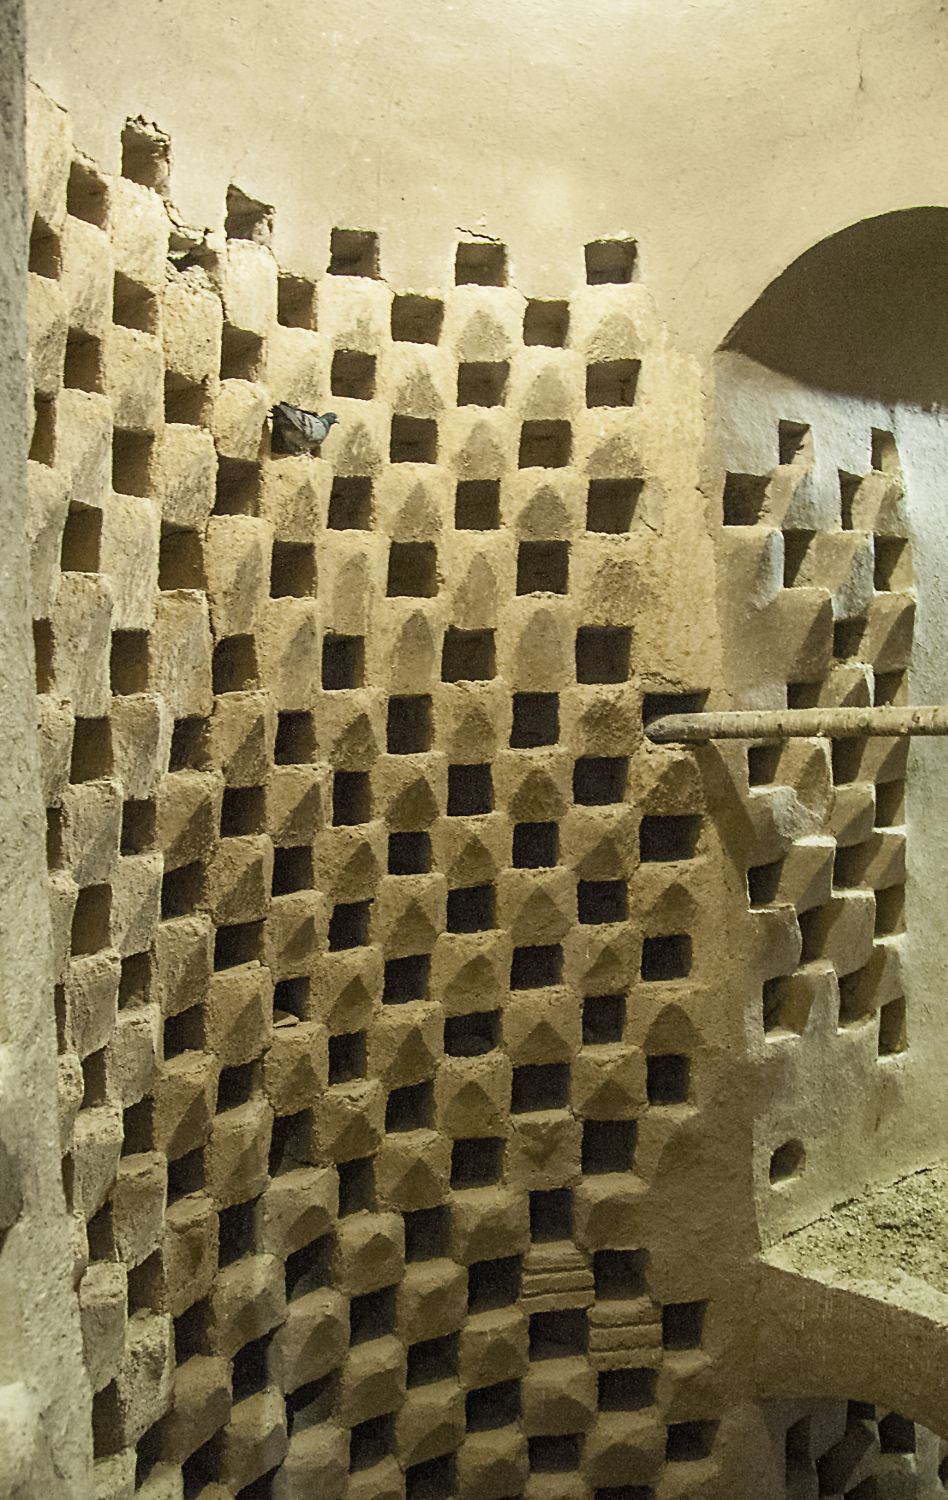 Pigeon tower (kabutarkhanah)&nbsp;in Mardavij Neighborhood of Isfahan, interior view of roosting ledges in a wall.